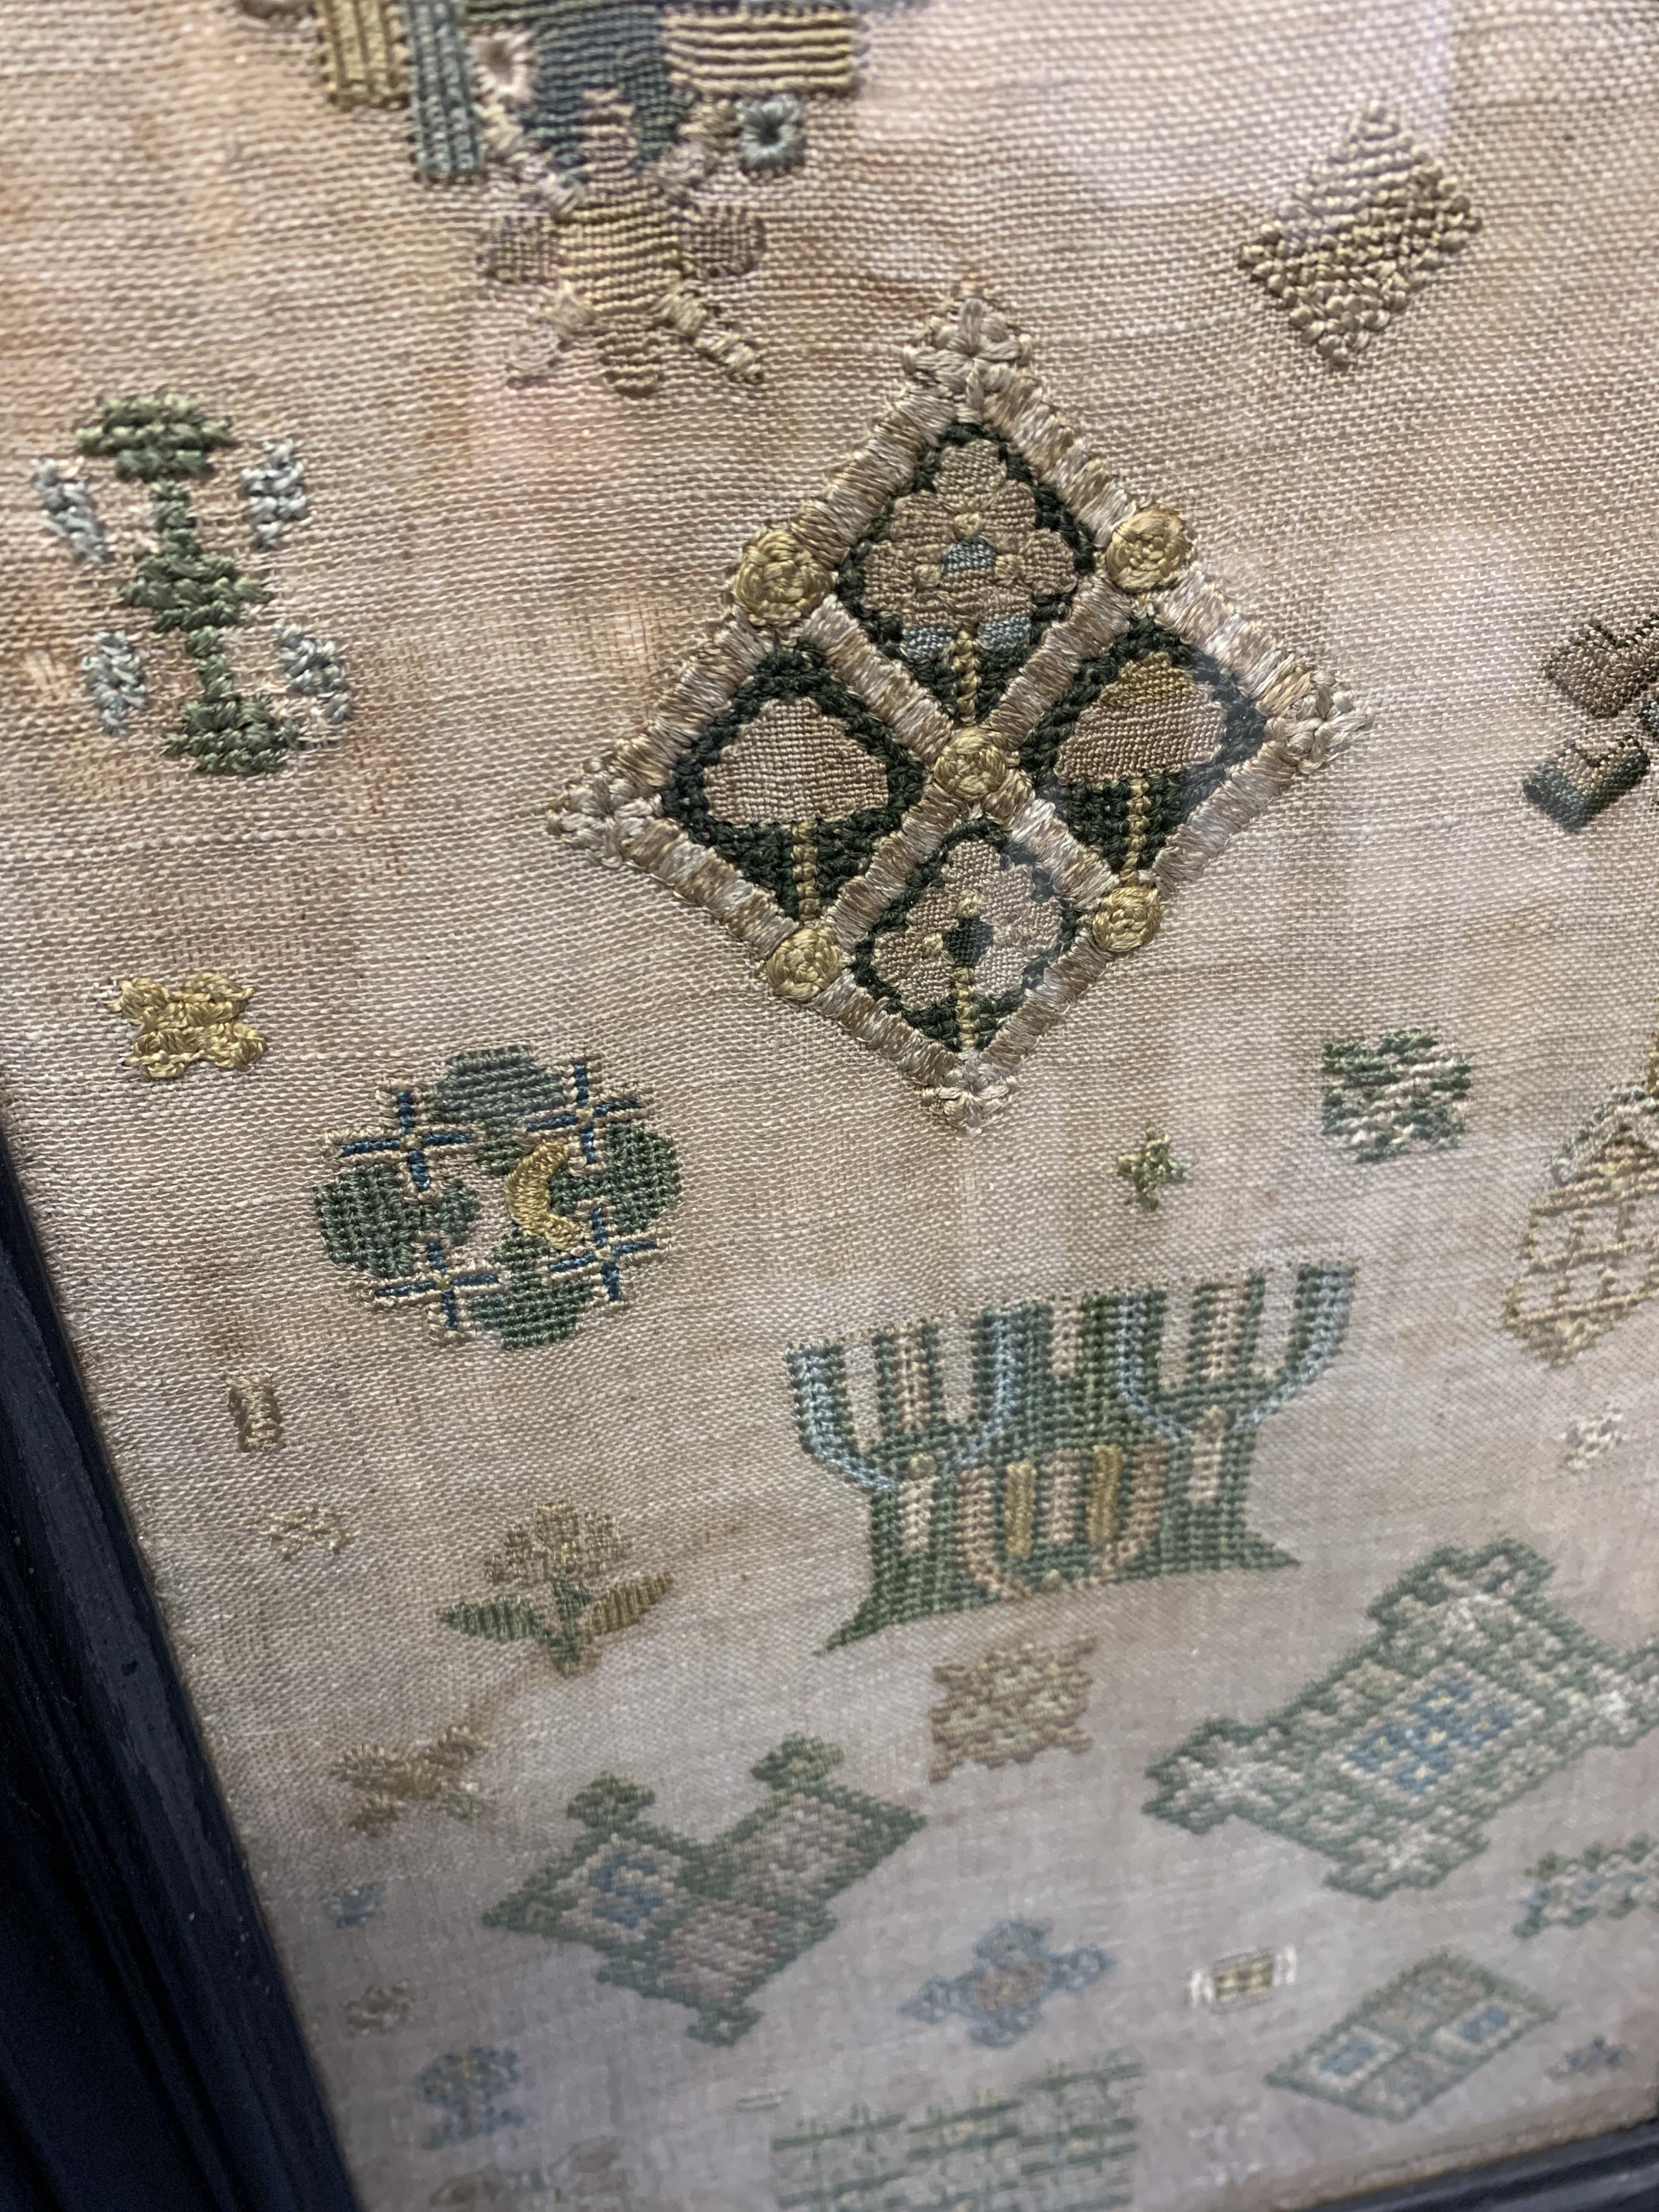 A RARE NEEDLEWORK SPOT SAMPLER BY GRACE THRUSTON, MID-17TH CENTURY worked with polychrome silks on - Image 8 of 15